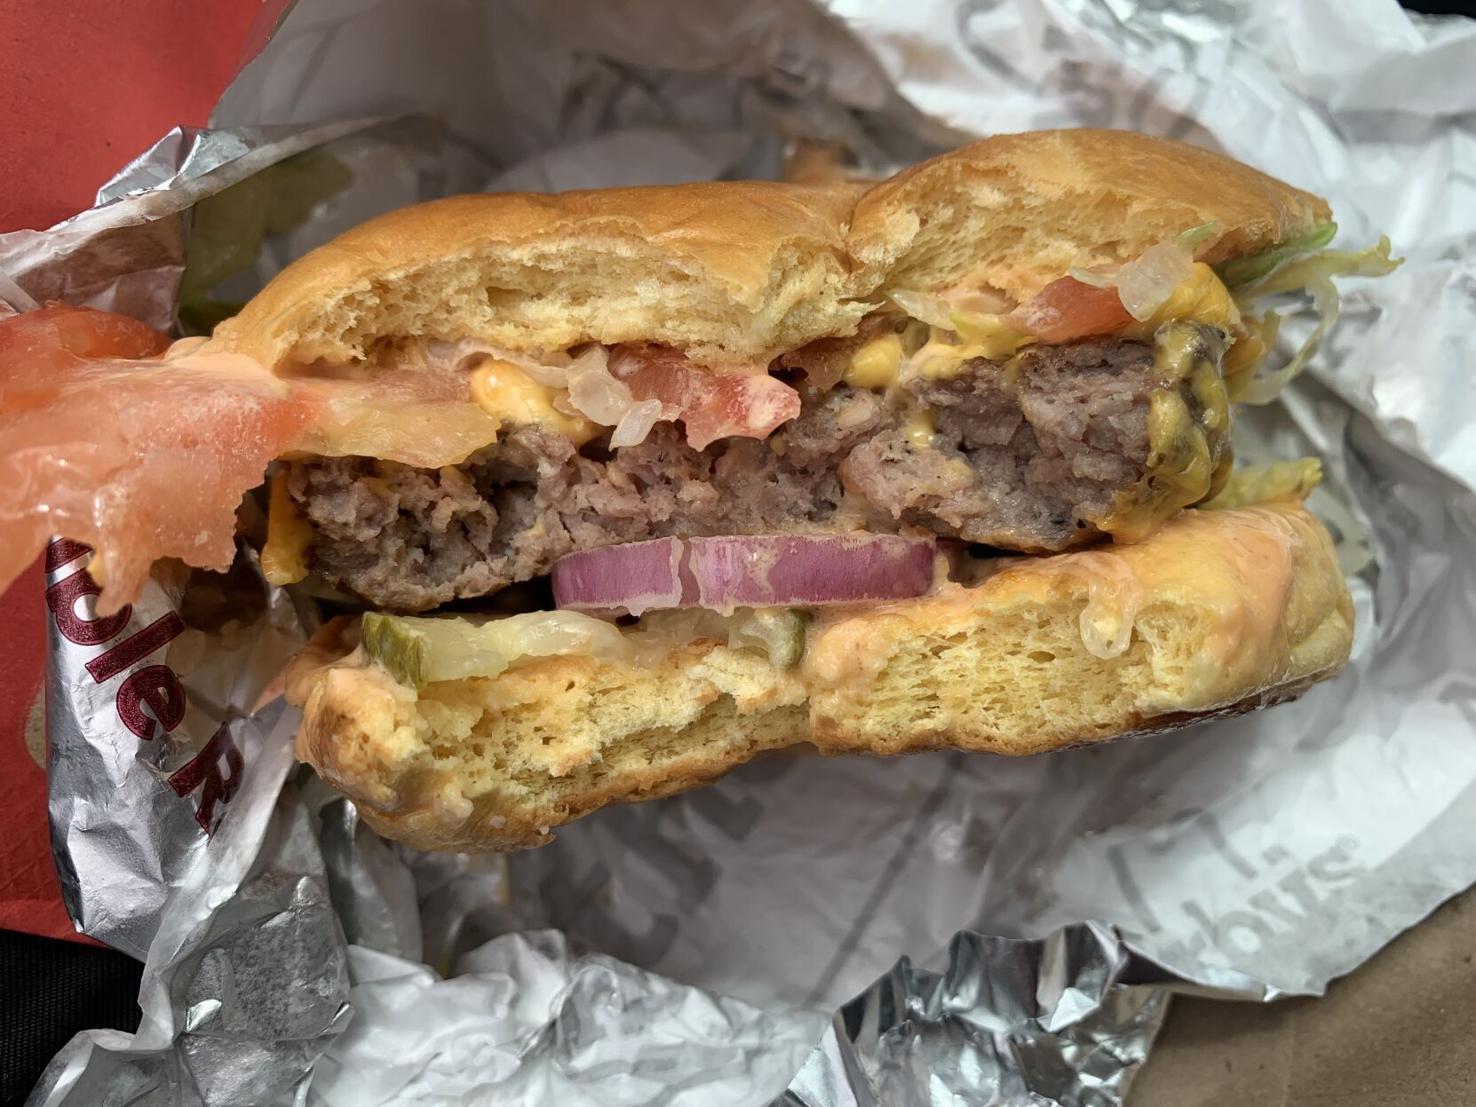 Burger review Arby's are hard to find in Madison, but the Wagyu burger